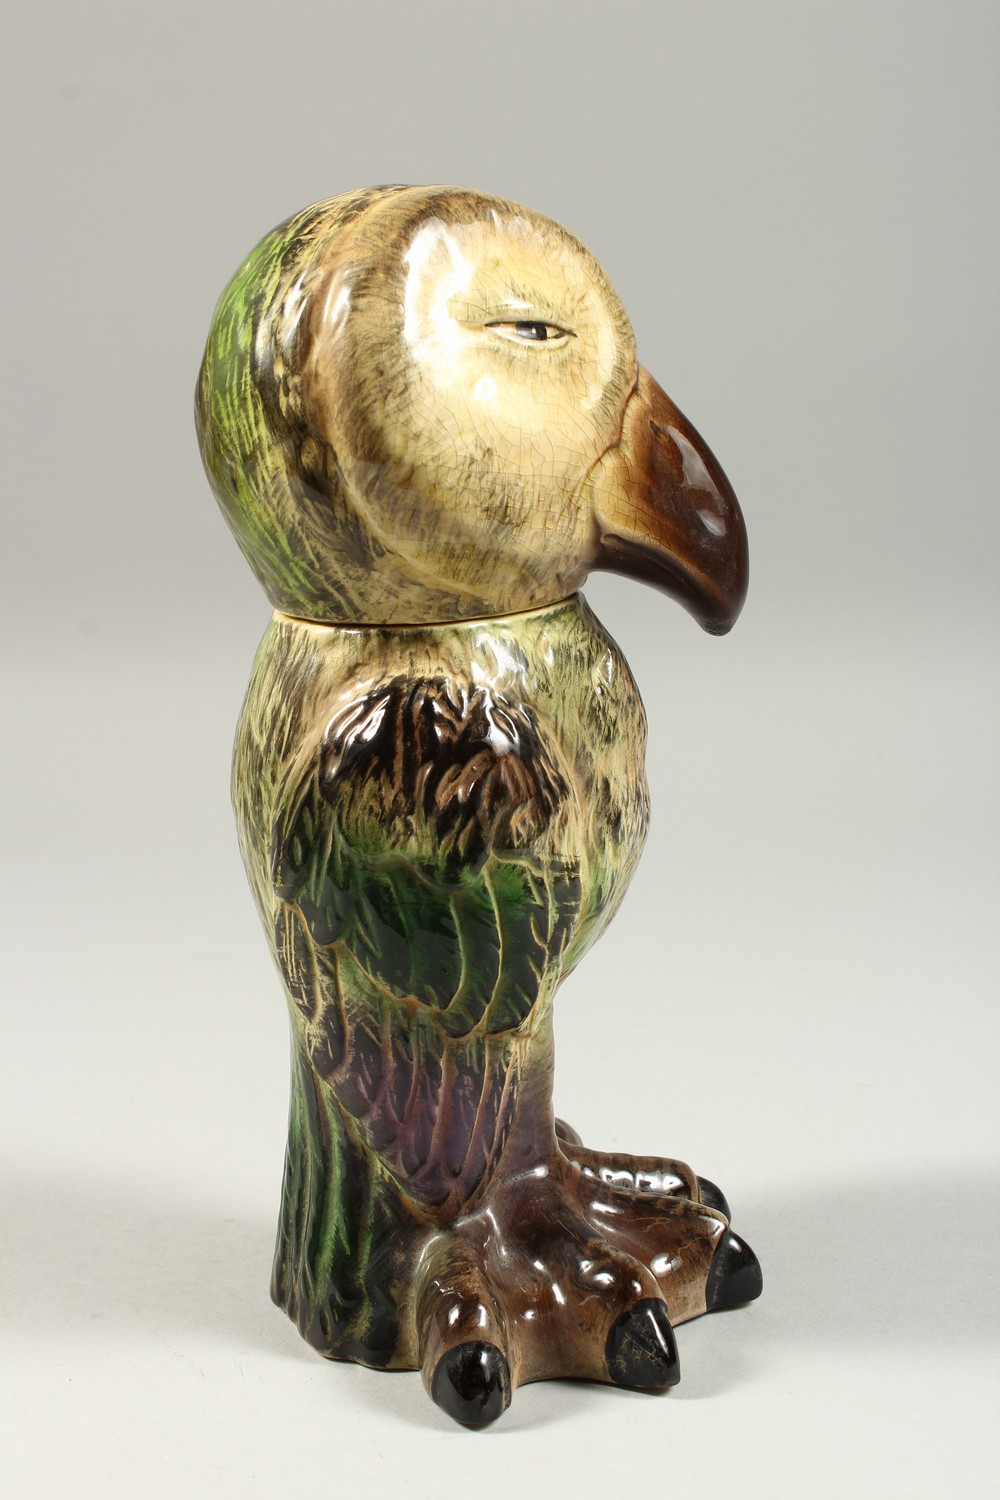 A MARTIN WARE STYLE "WALLY BIRD" JAR AND COVER. 9.5ins high. - Image 2 of 9